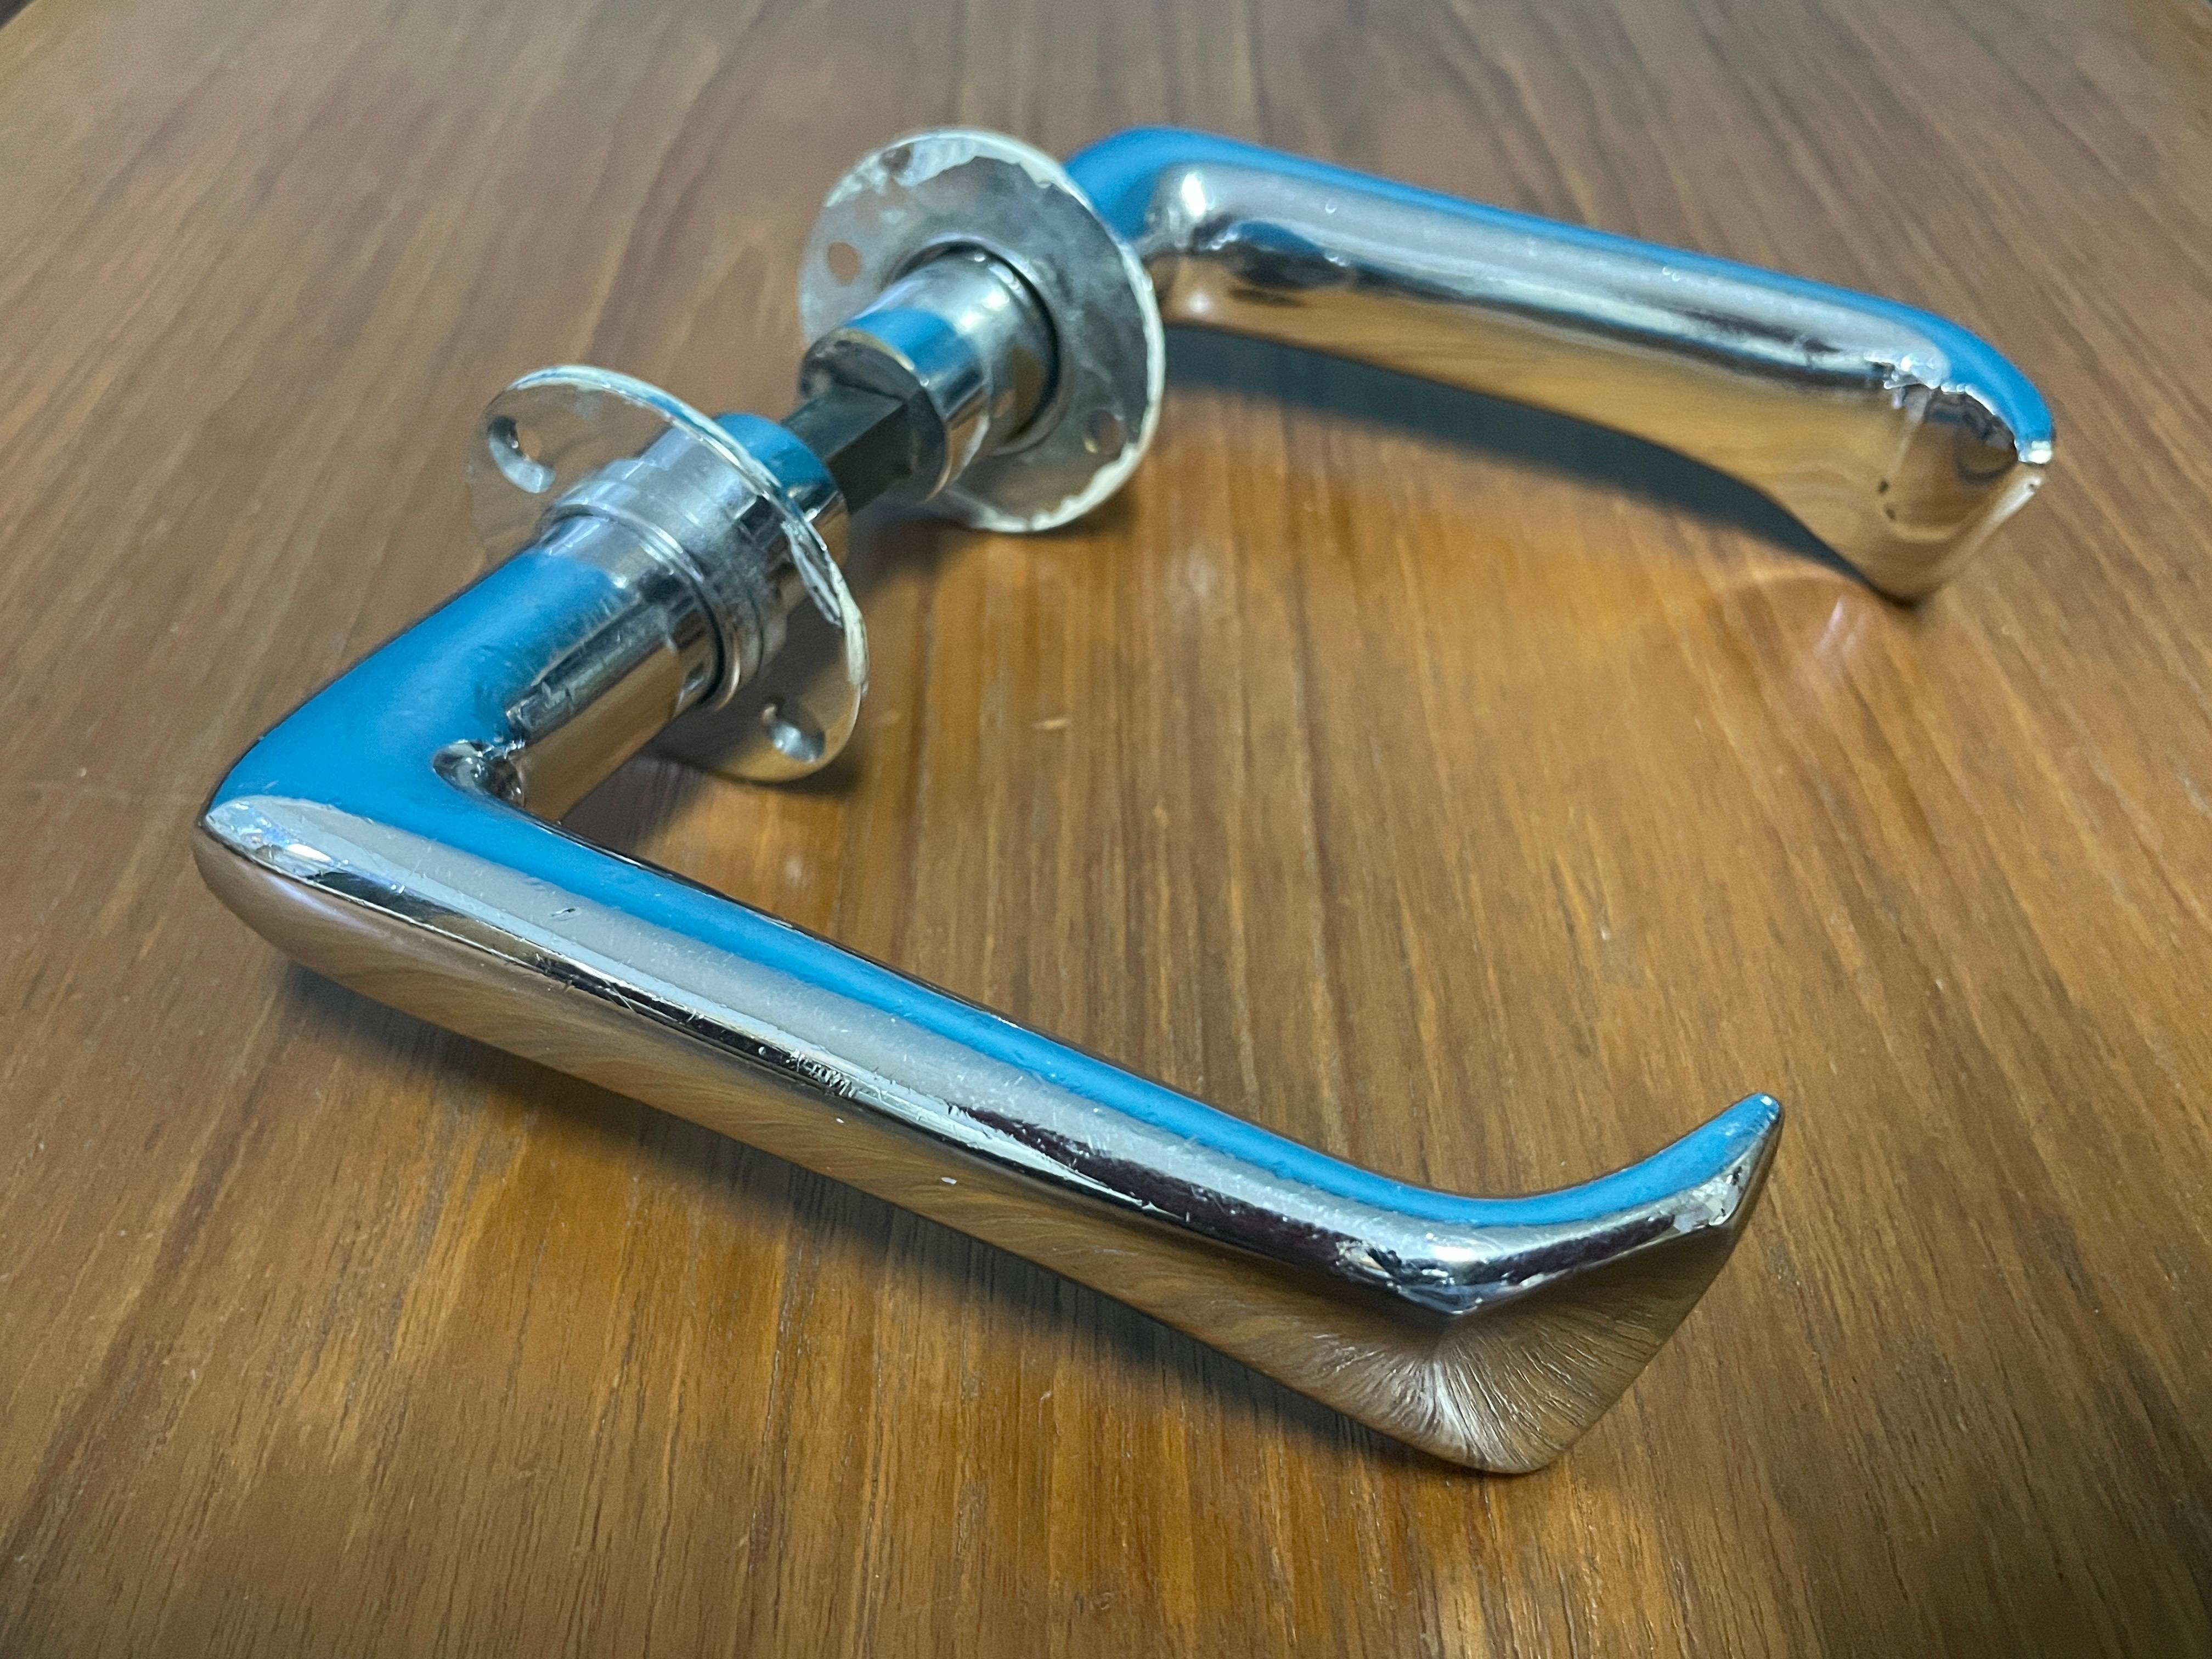 Sculptural Door Handles designed by Alvar Aalto in 1950s. Made in Finland.

Materials: Chrome-plated Brass.

Includes two handles and spacer. No screws.

Rarely for sale. (Most of the same model are newer and made of aluminum.).